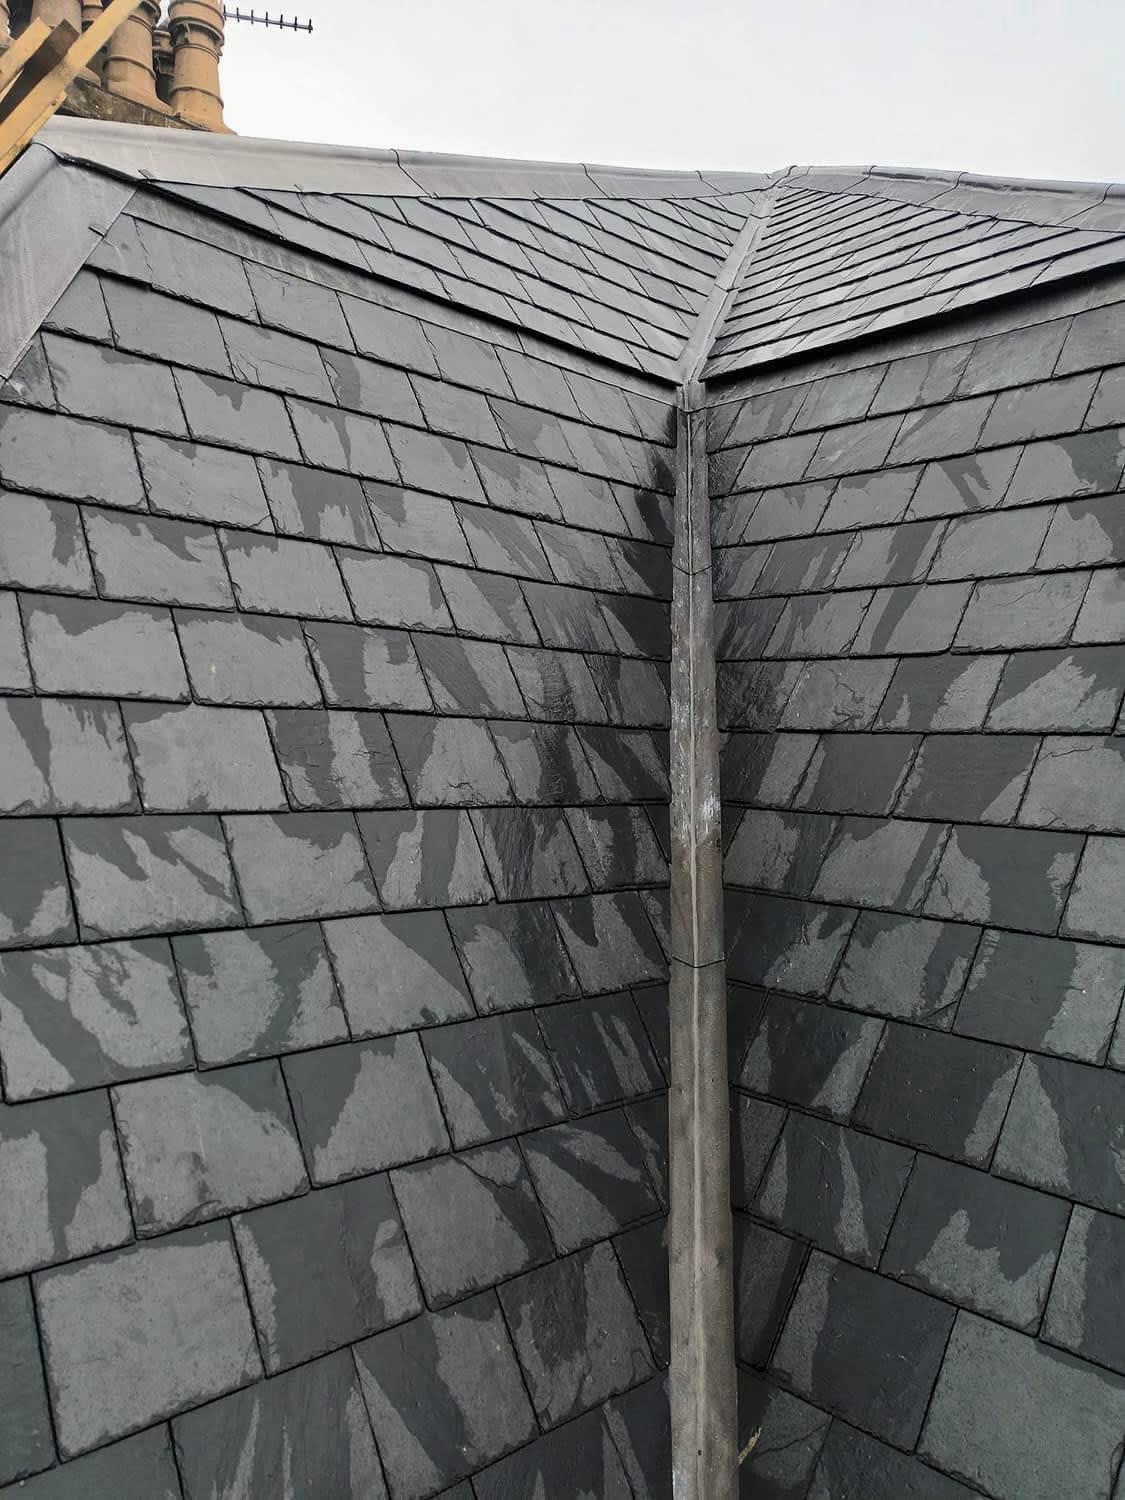 Images KM Roofing